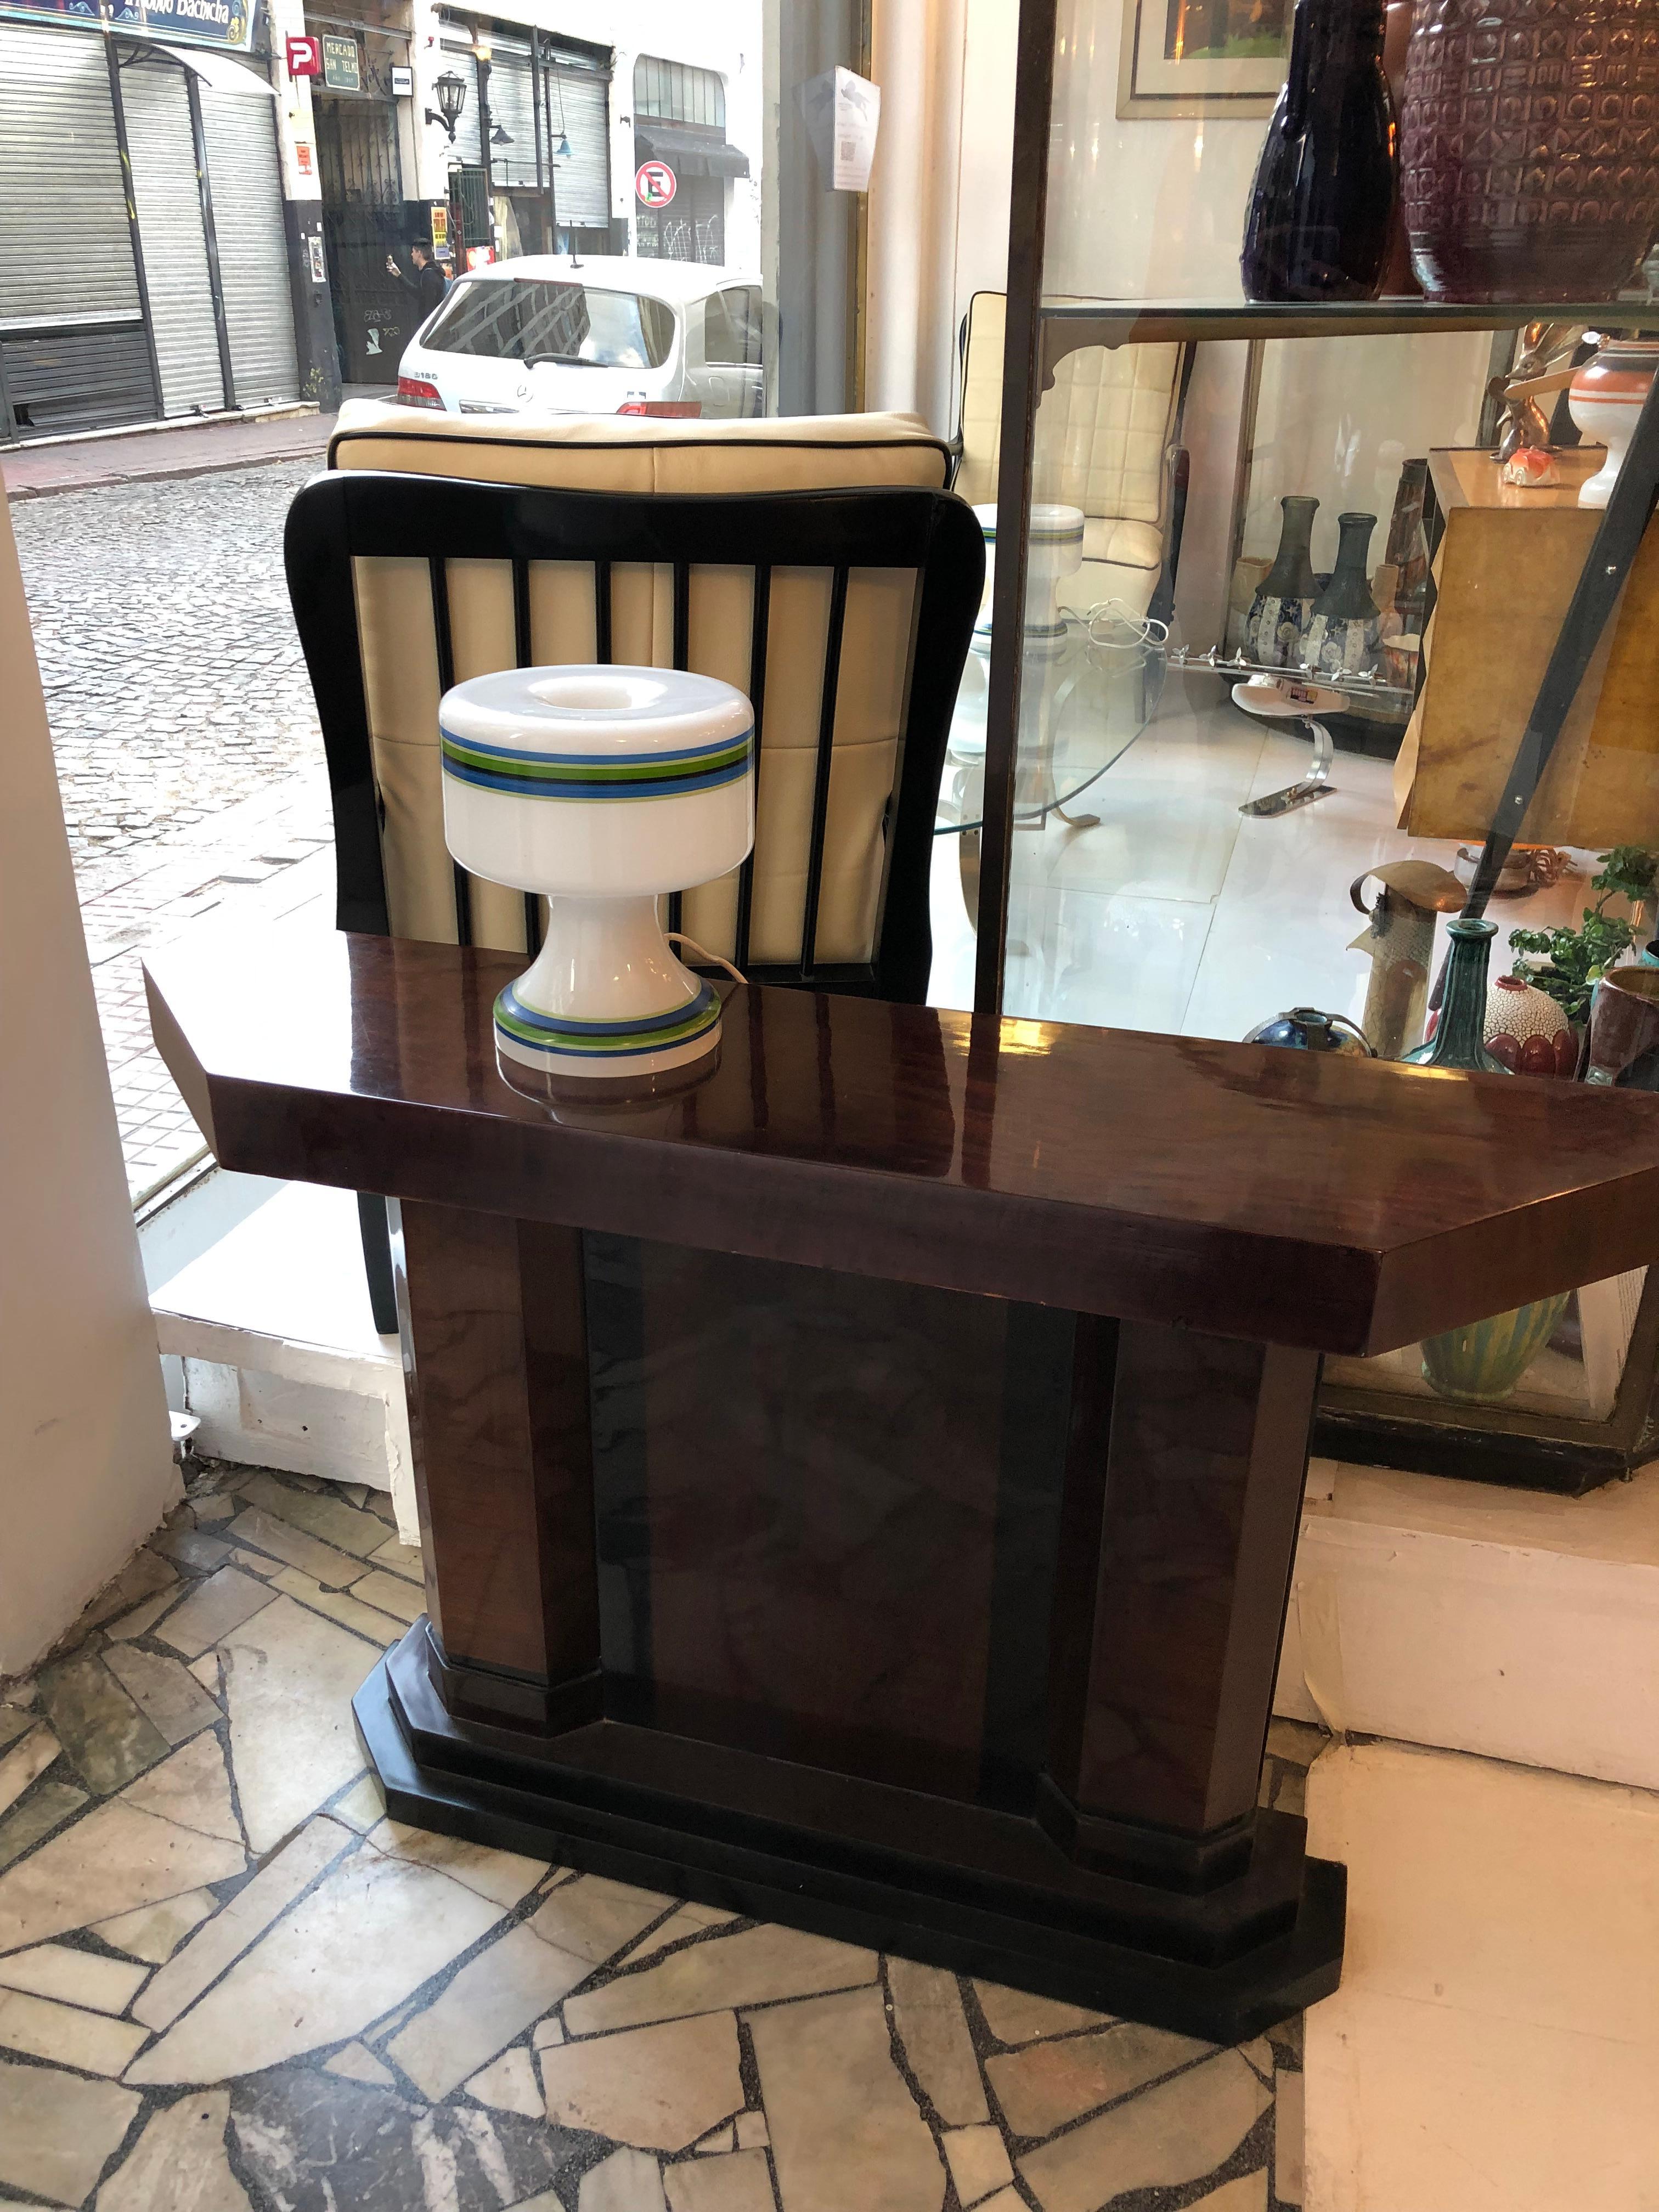 2 tables lamps Italian

Material: glass 
Country: italy
To take care of your property and the lives of our customers, the new wiring has been done.
If you want to live in the golden years, this is the lighting that your project needs.
We have